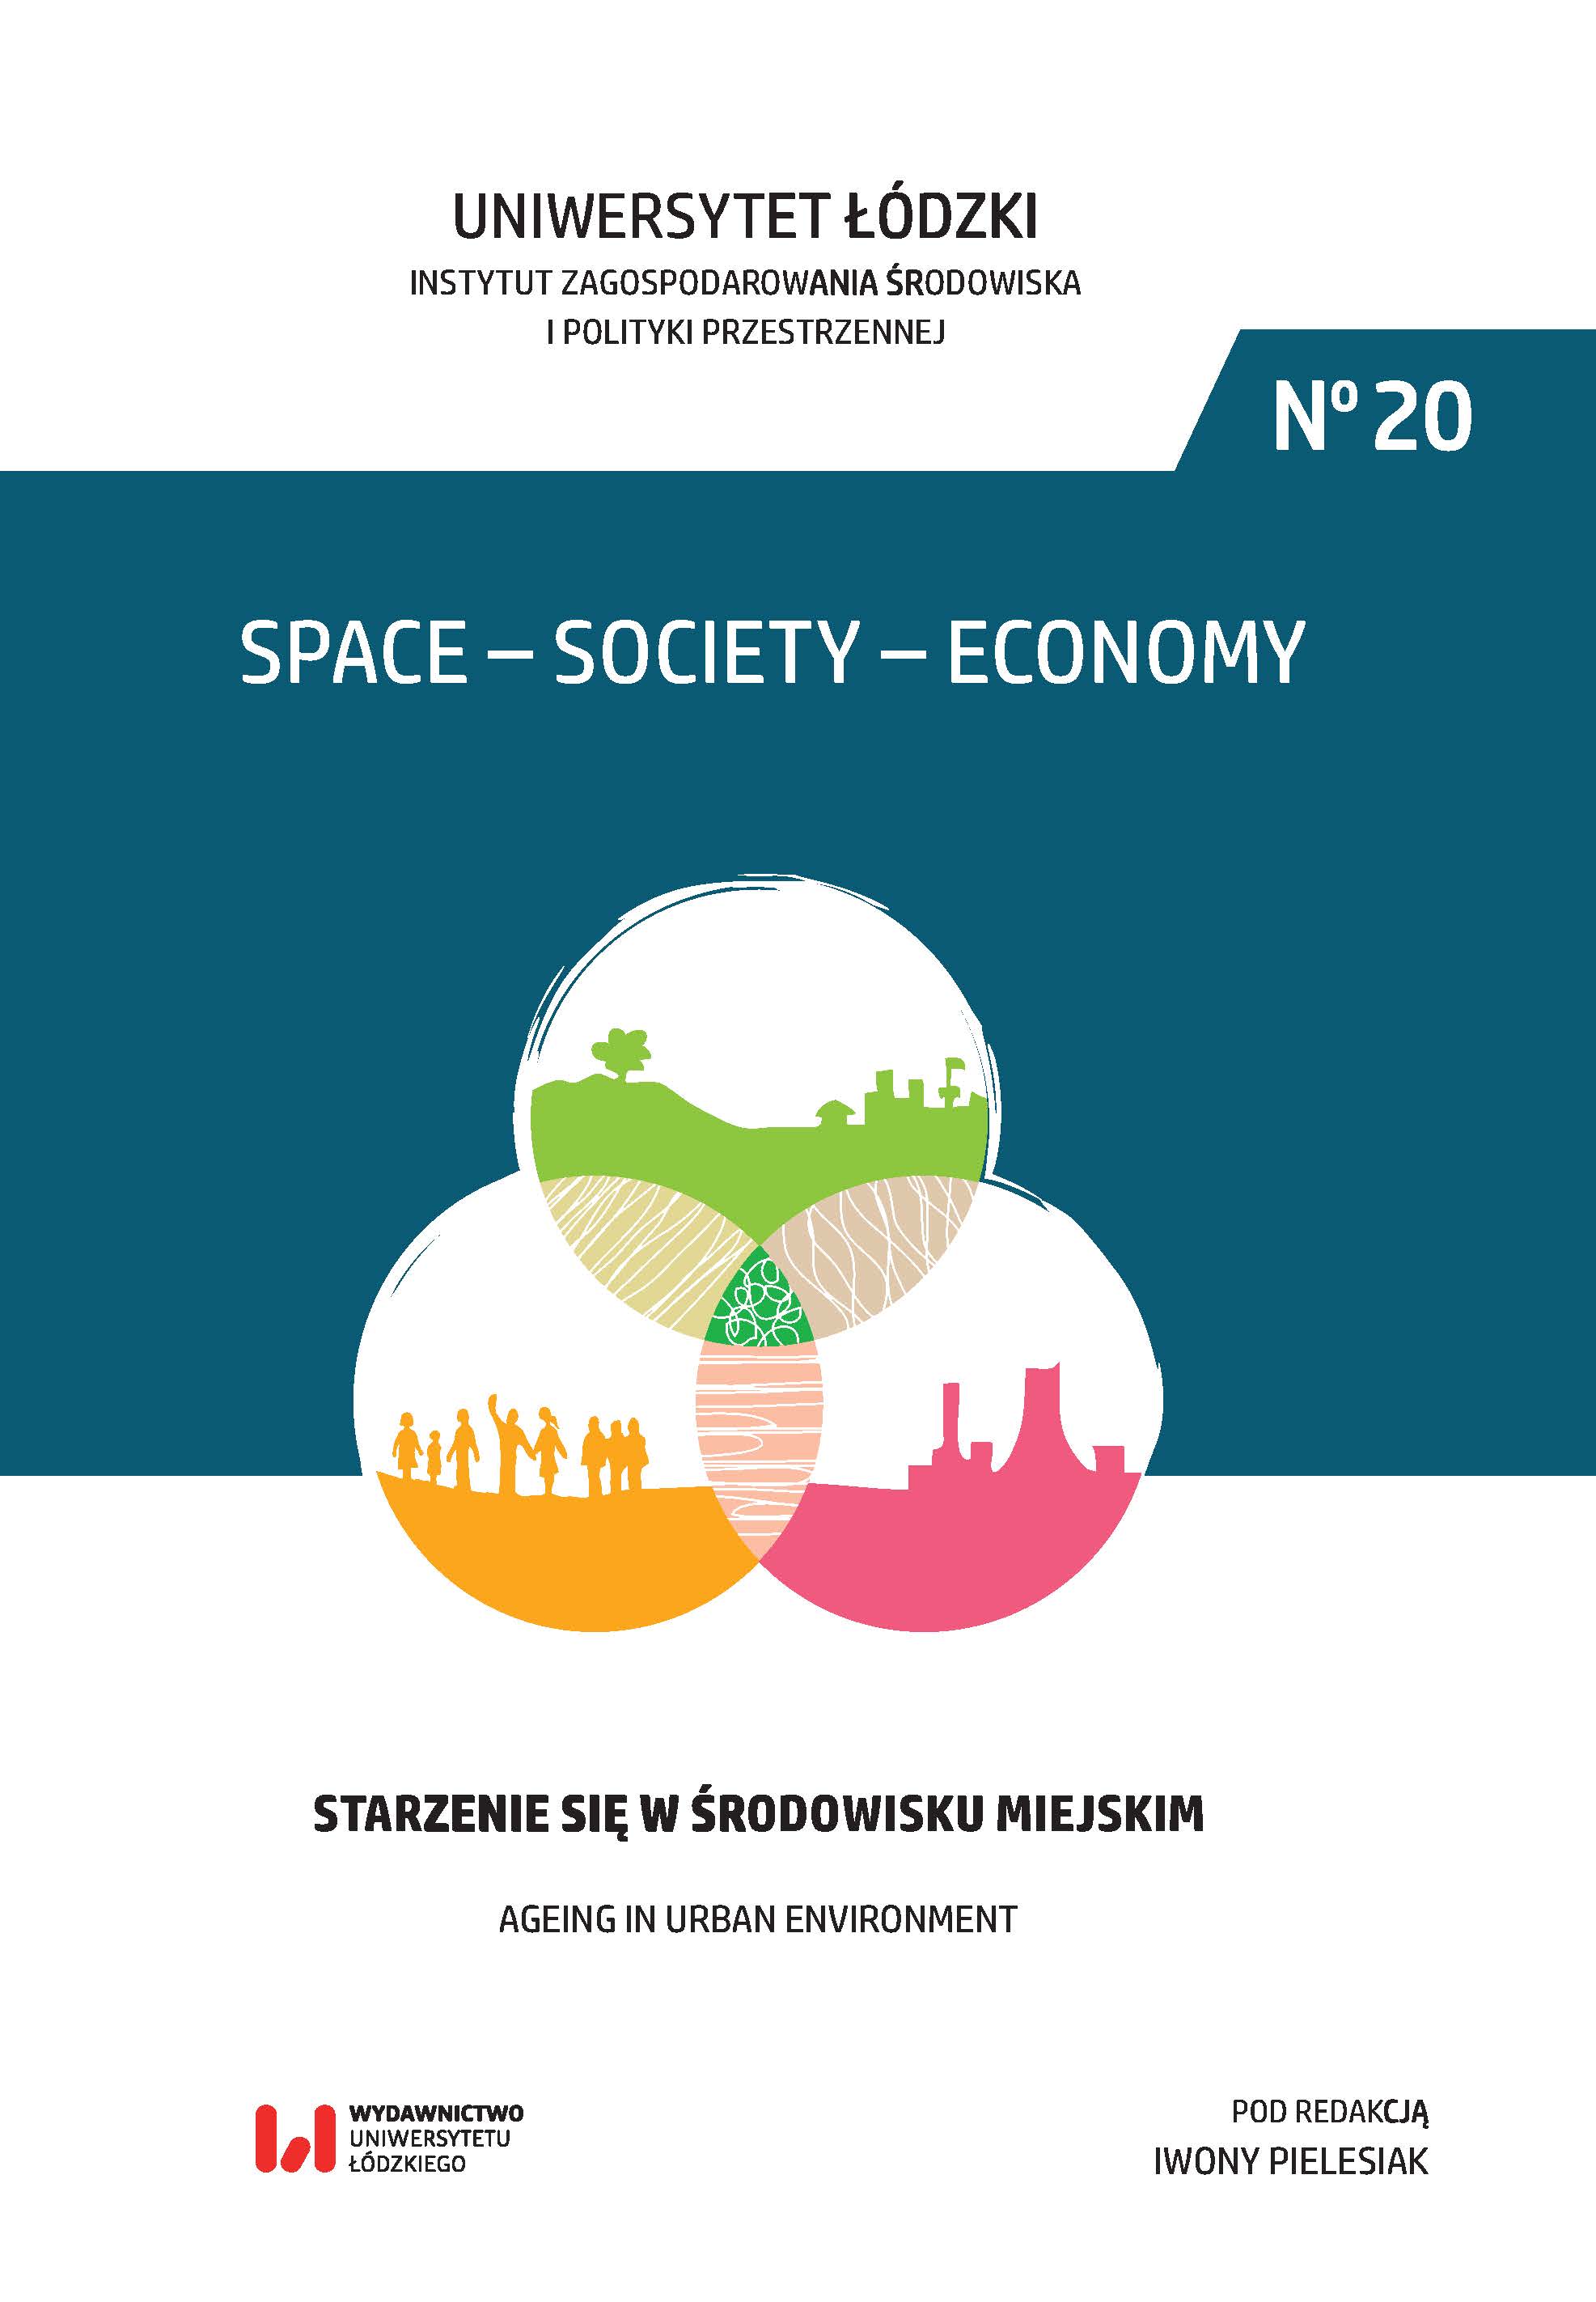 The shapes of land lots within metropolitan space. The Łódź case Cover Image